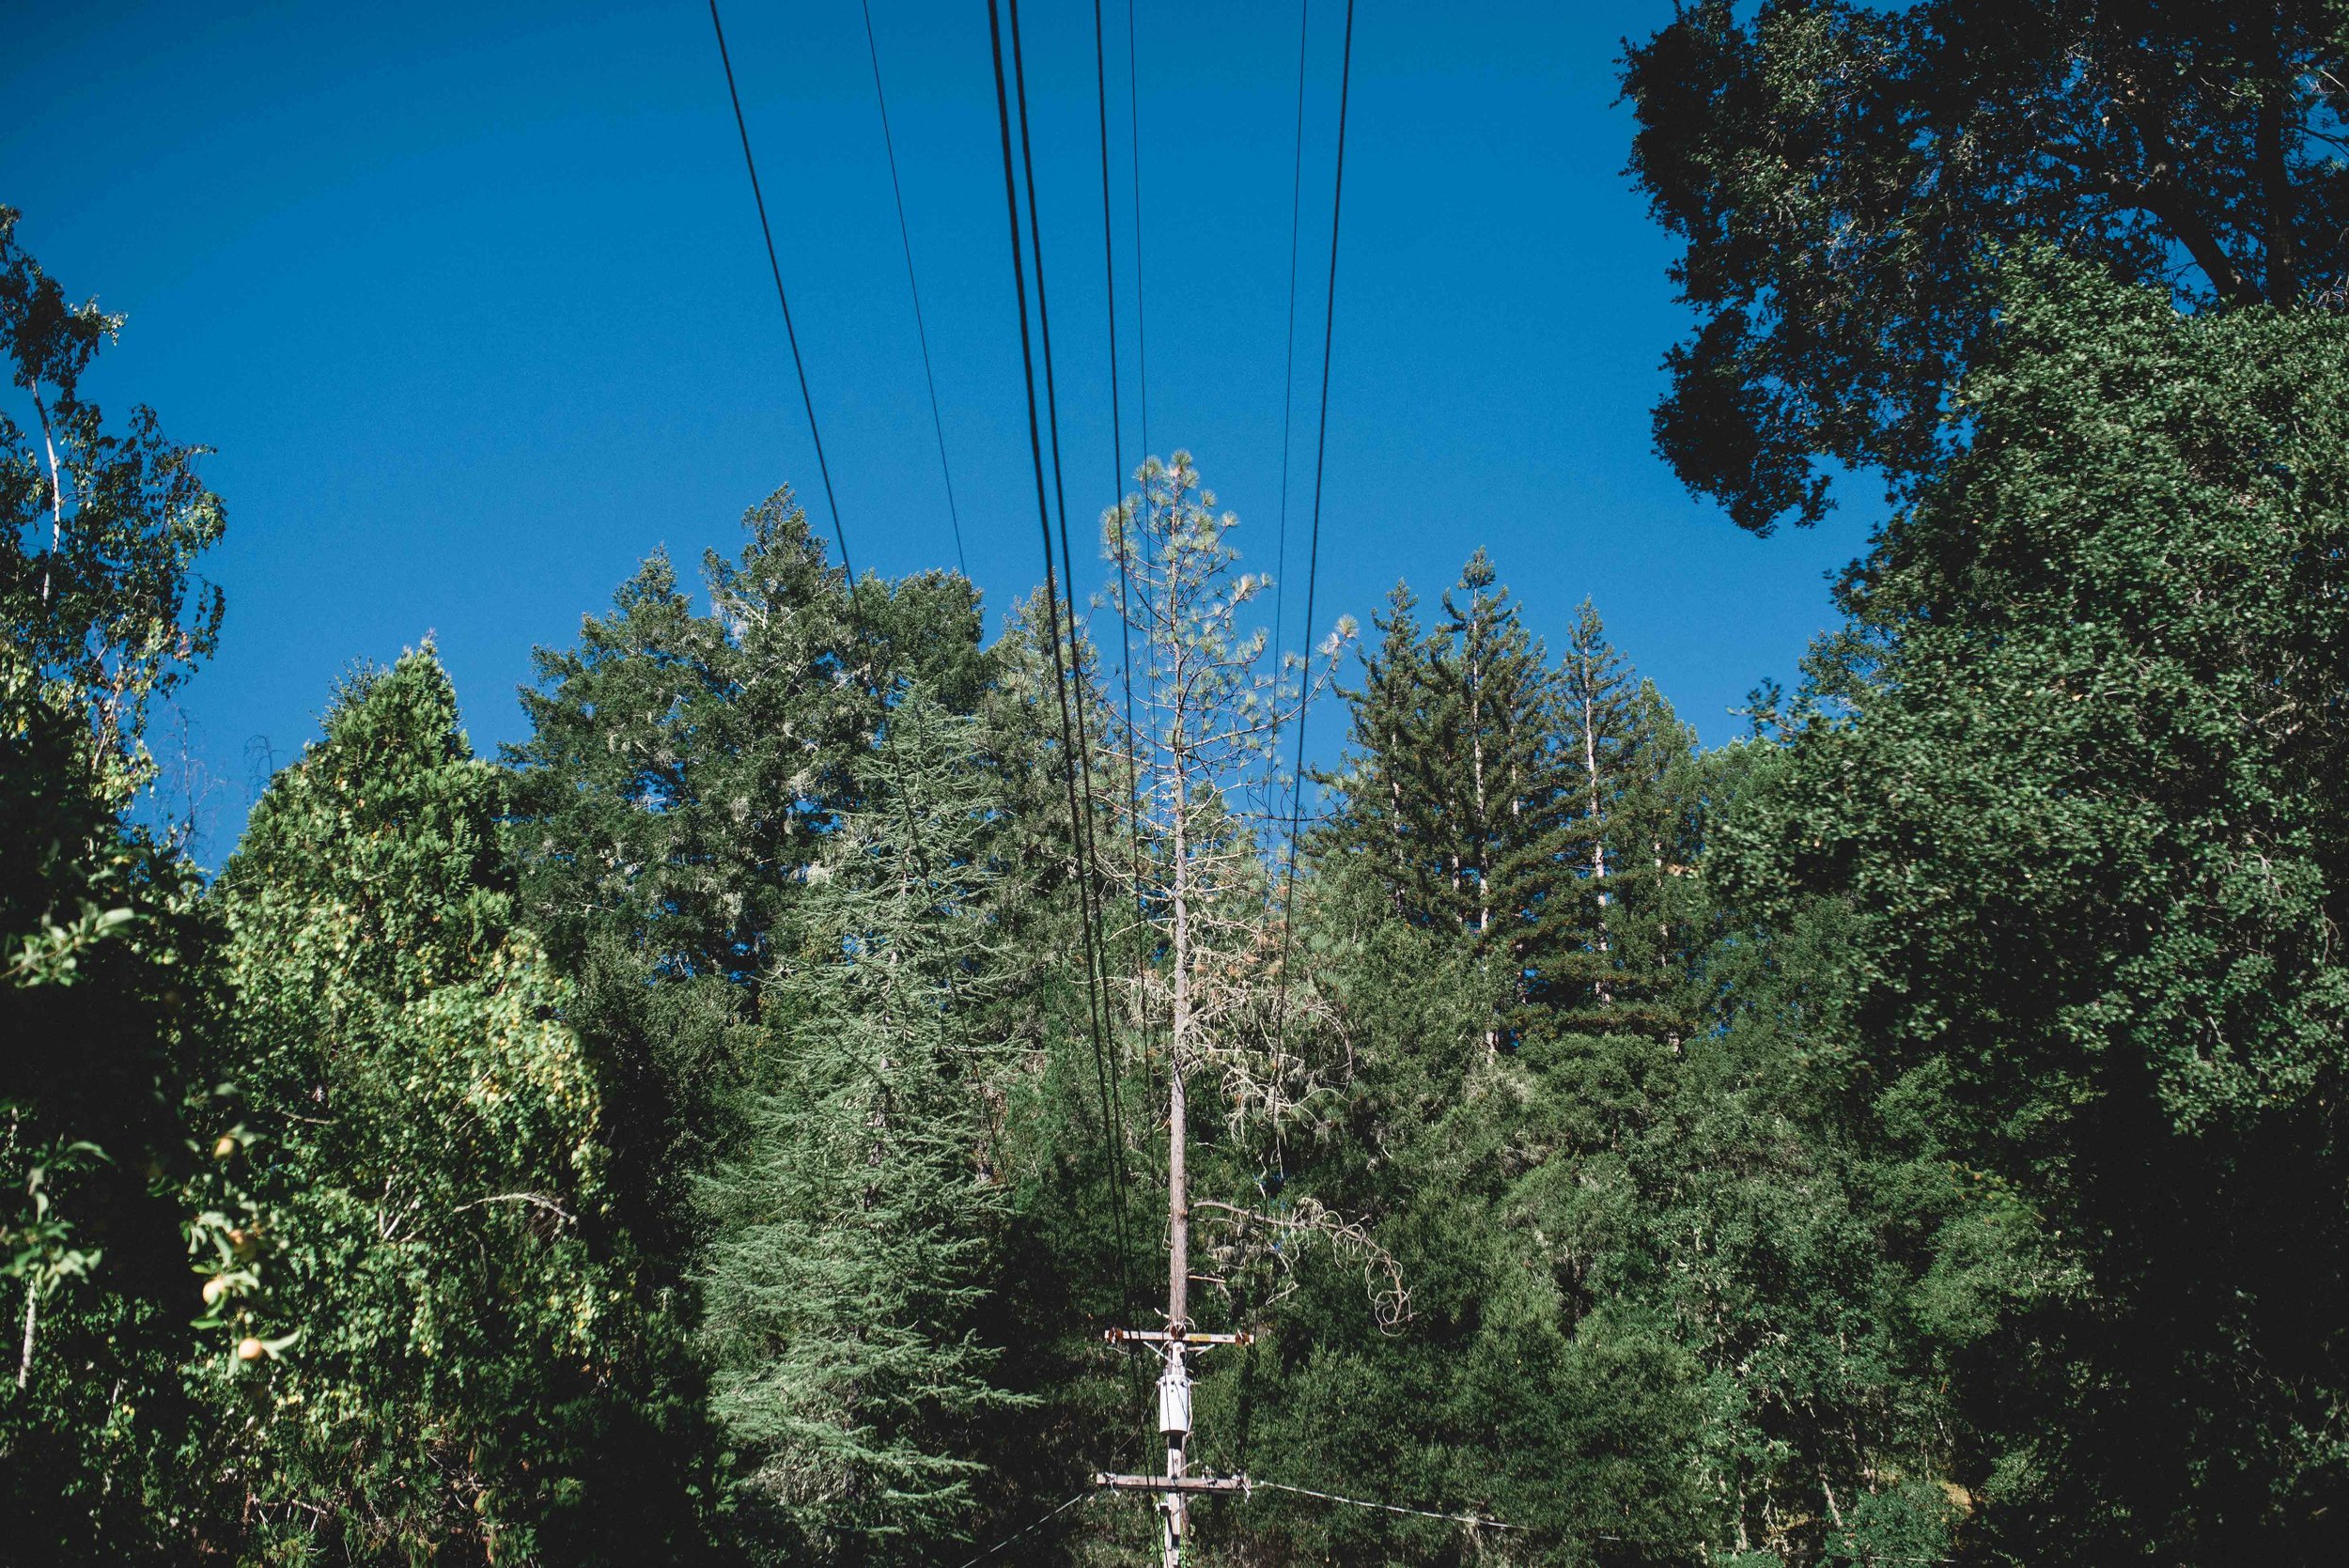  High voltage pole and the trees that surround it in the Santa Cruz Mountains. Pacific Gas and Electric has instituted a Community Wildfire Safety Program, with Enhanced Vegetation Work in areas of Extreme Wildfire Threat by reducing vegetation in th